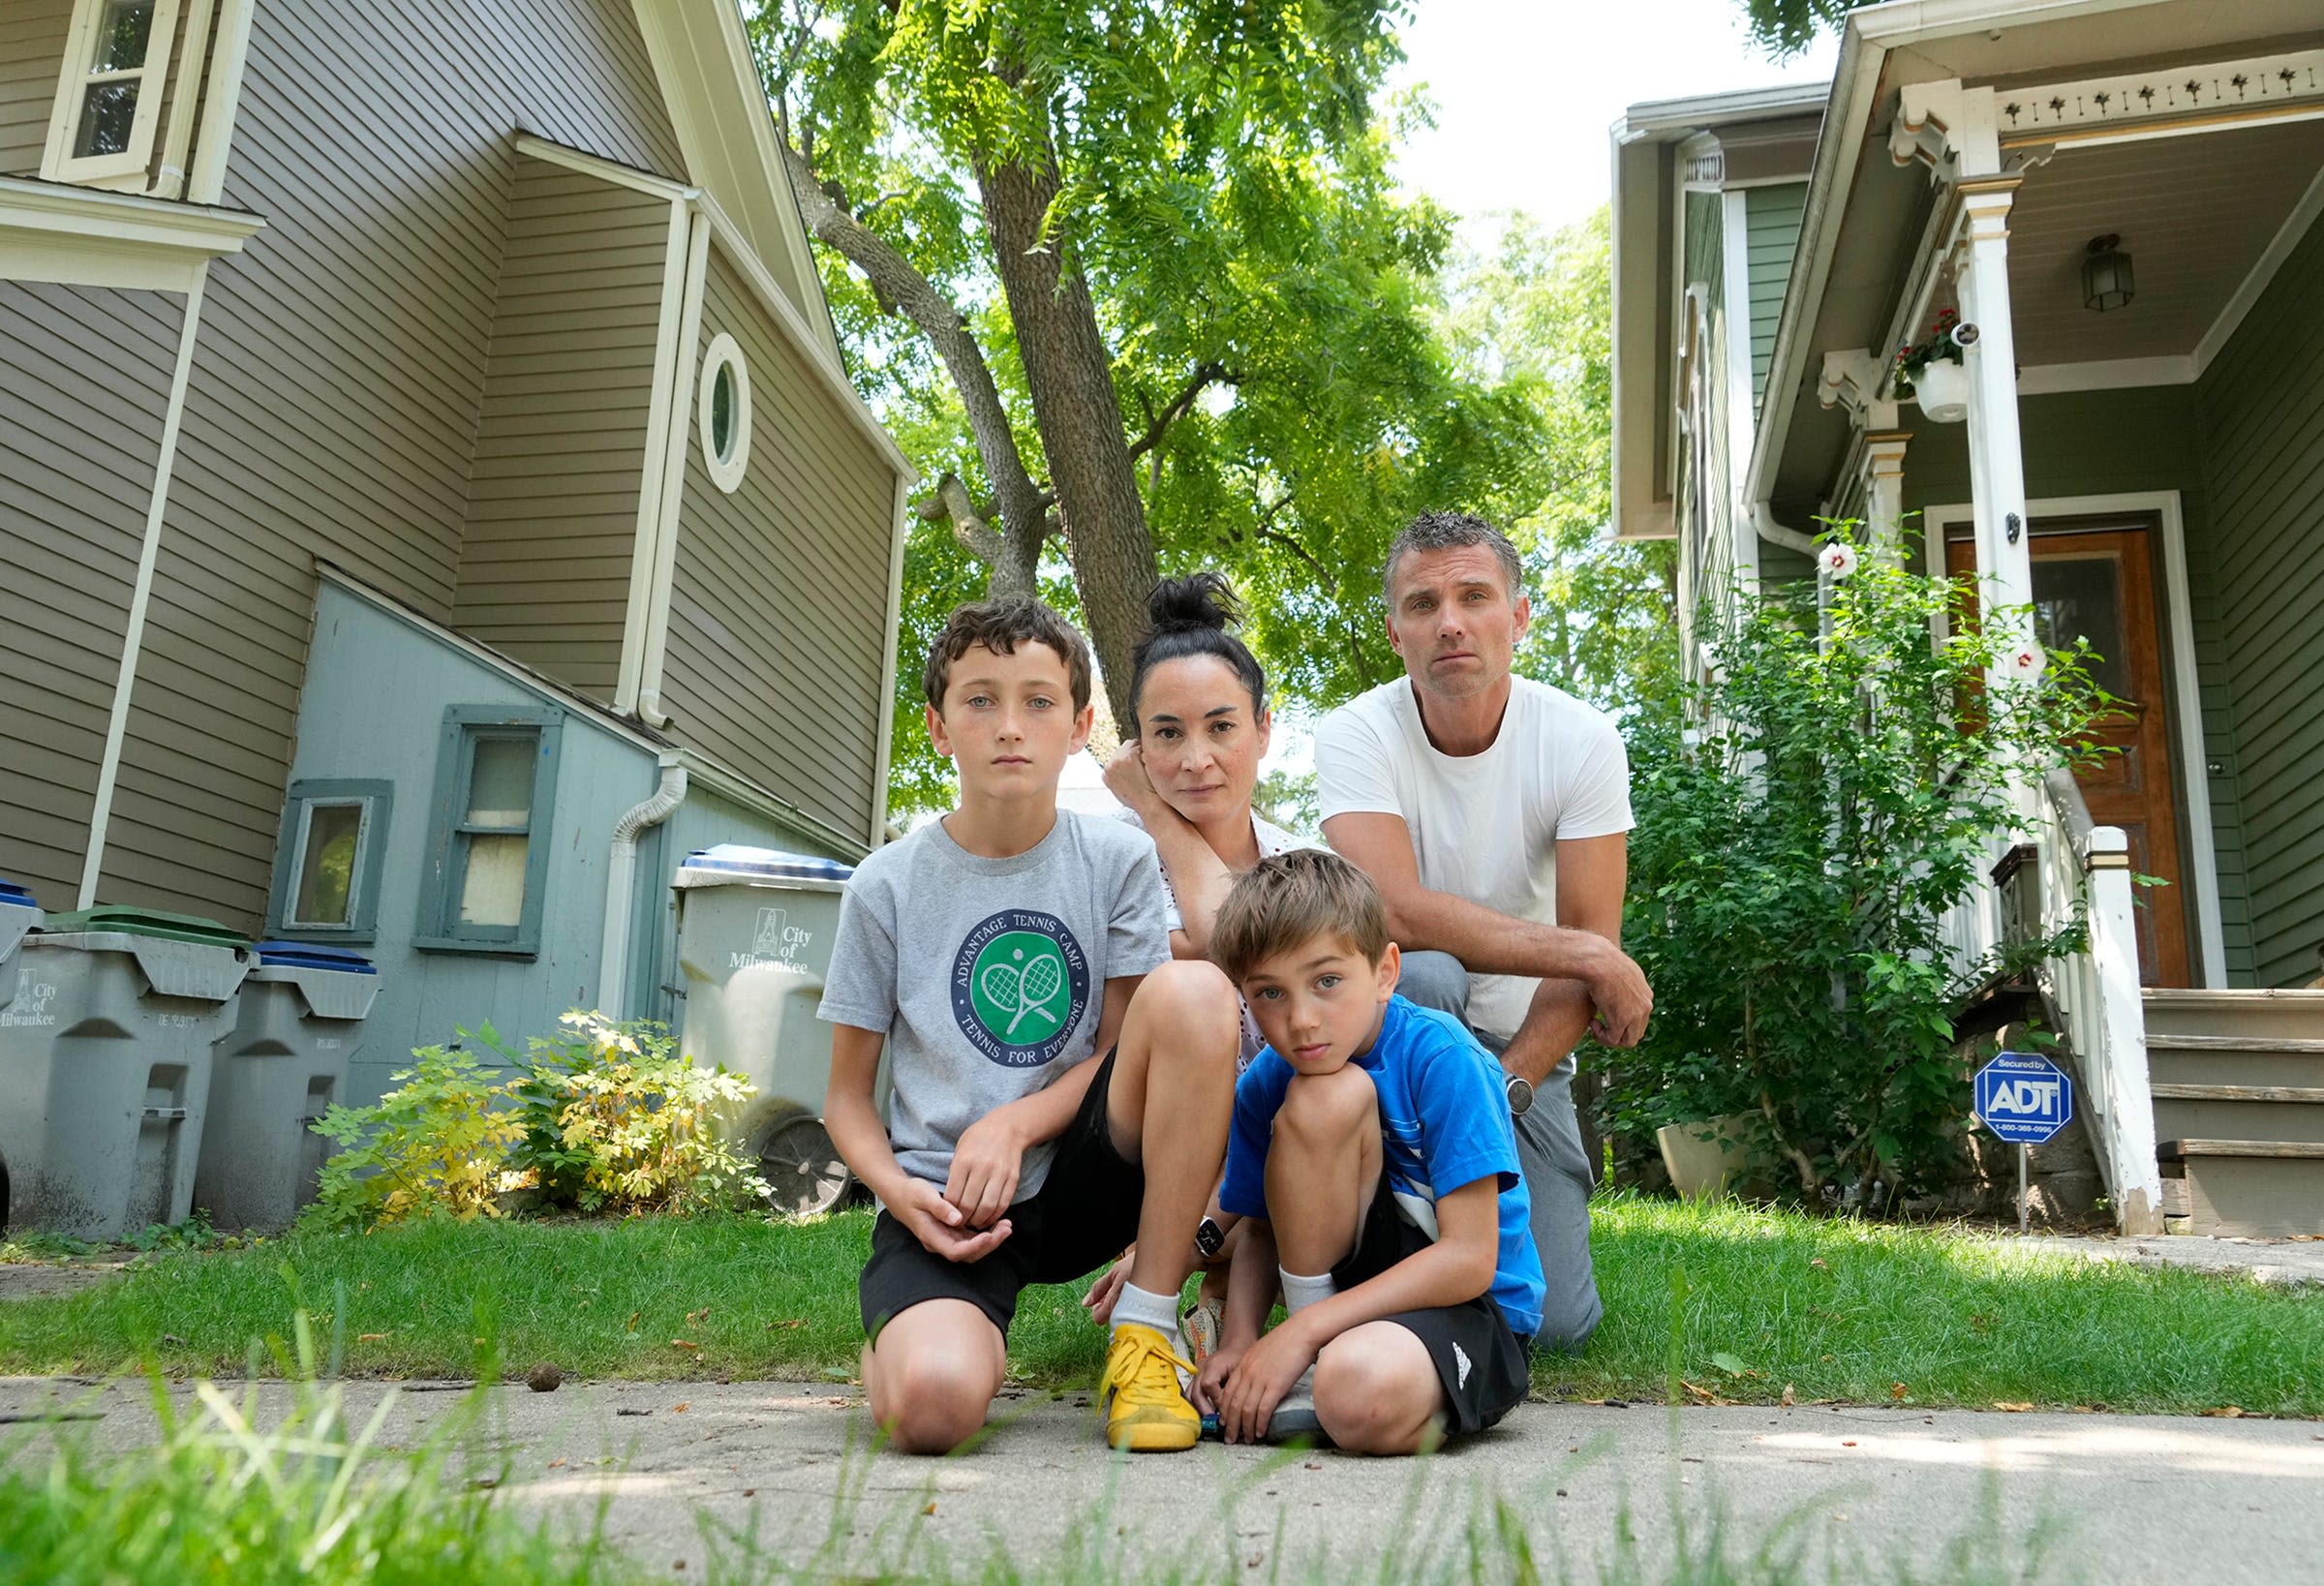 A renovation next door left lead paint chips in this family's yard. Who should clean it up?